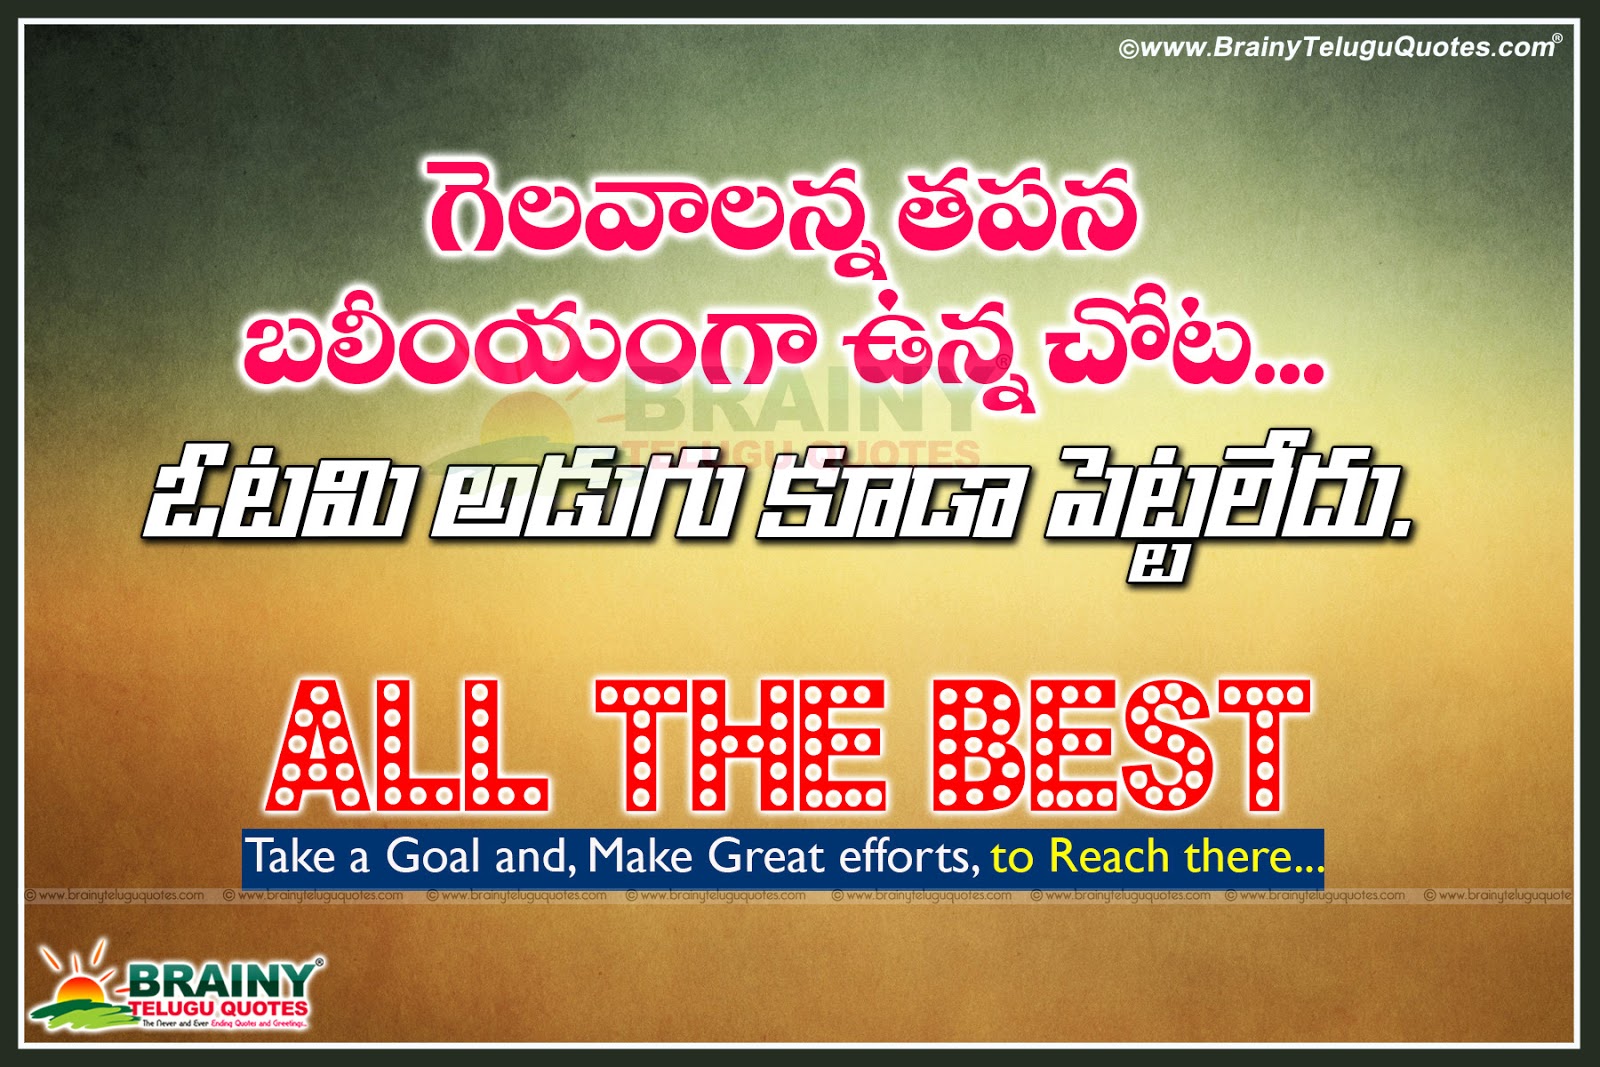 All The Best Wishes Telugu  Greetings SMS Quotes  Kavithalu 